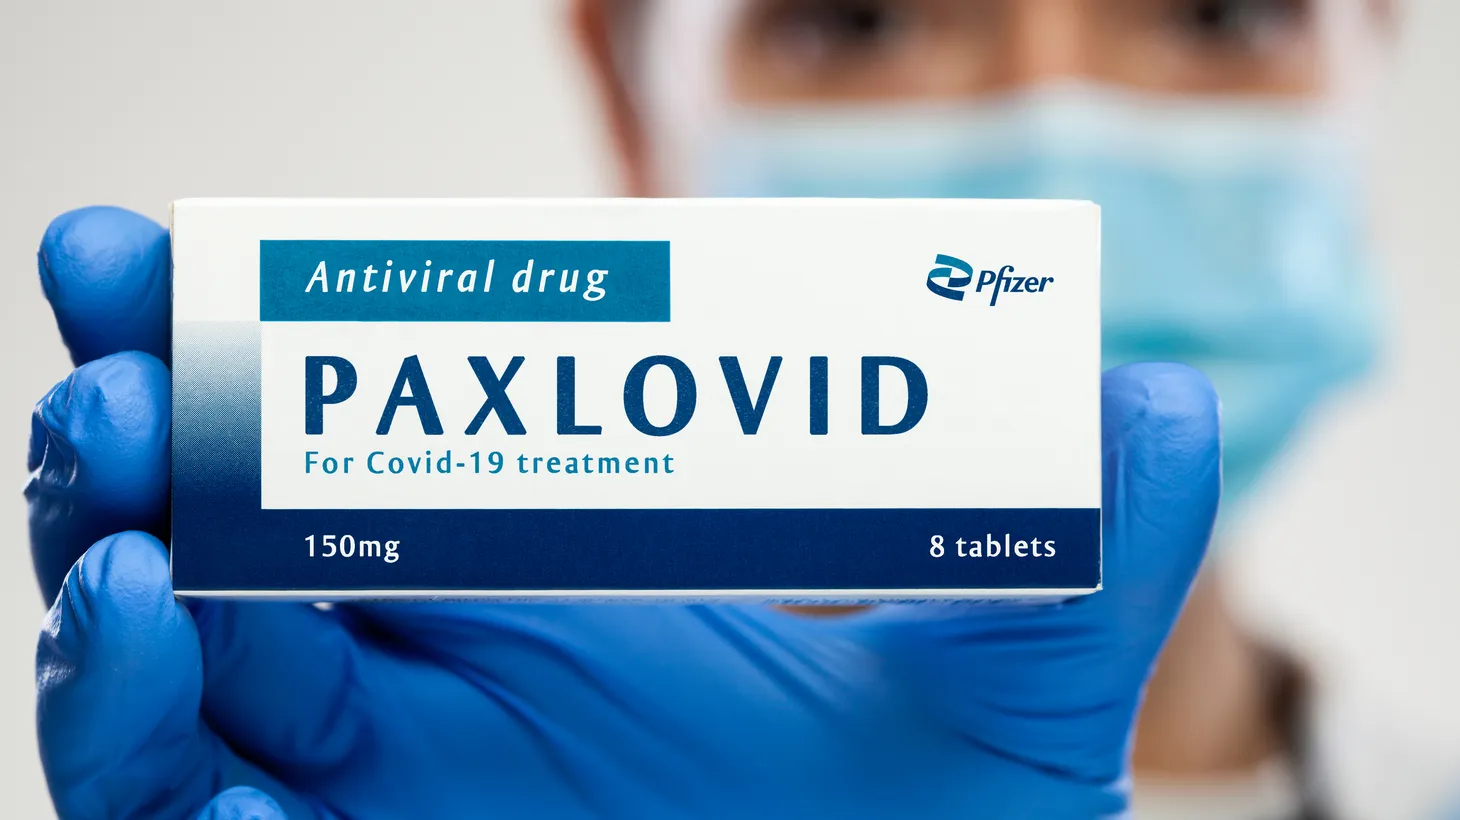 “It's very important for people to understand that Paxlovid, it is still a very important therapeutic for our patients who meet the criteria, because it still is doing what it was supposed to do, which is keep people from progressing to severe disease,” says Kalpana Gupta, chief of infectious diseases at Veterans Administration Boston Healthcare System.